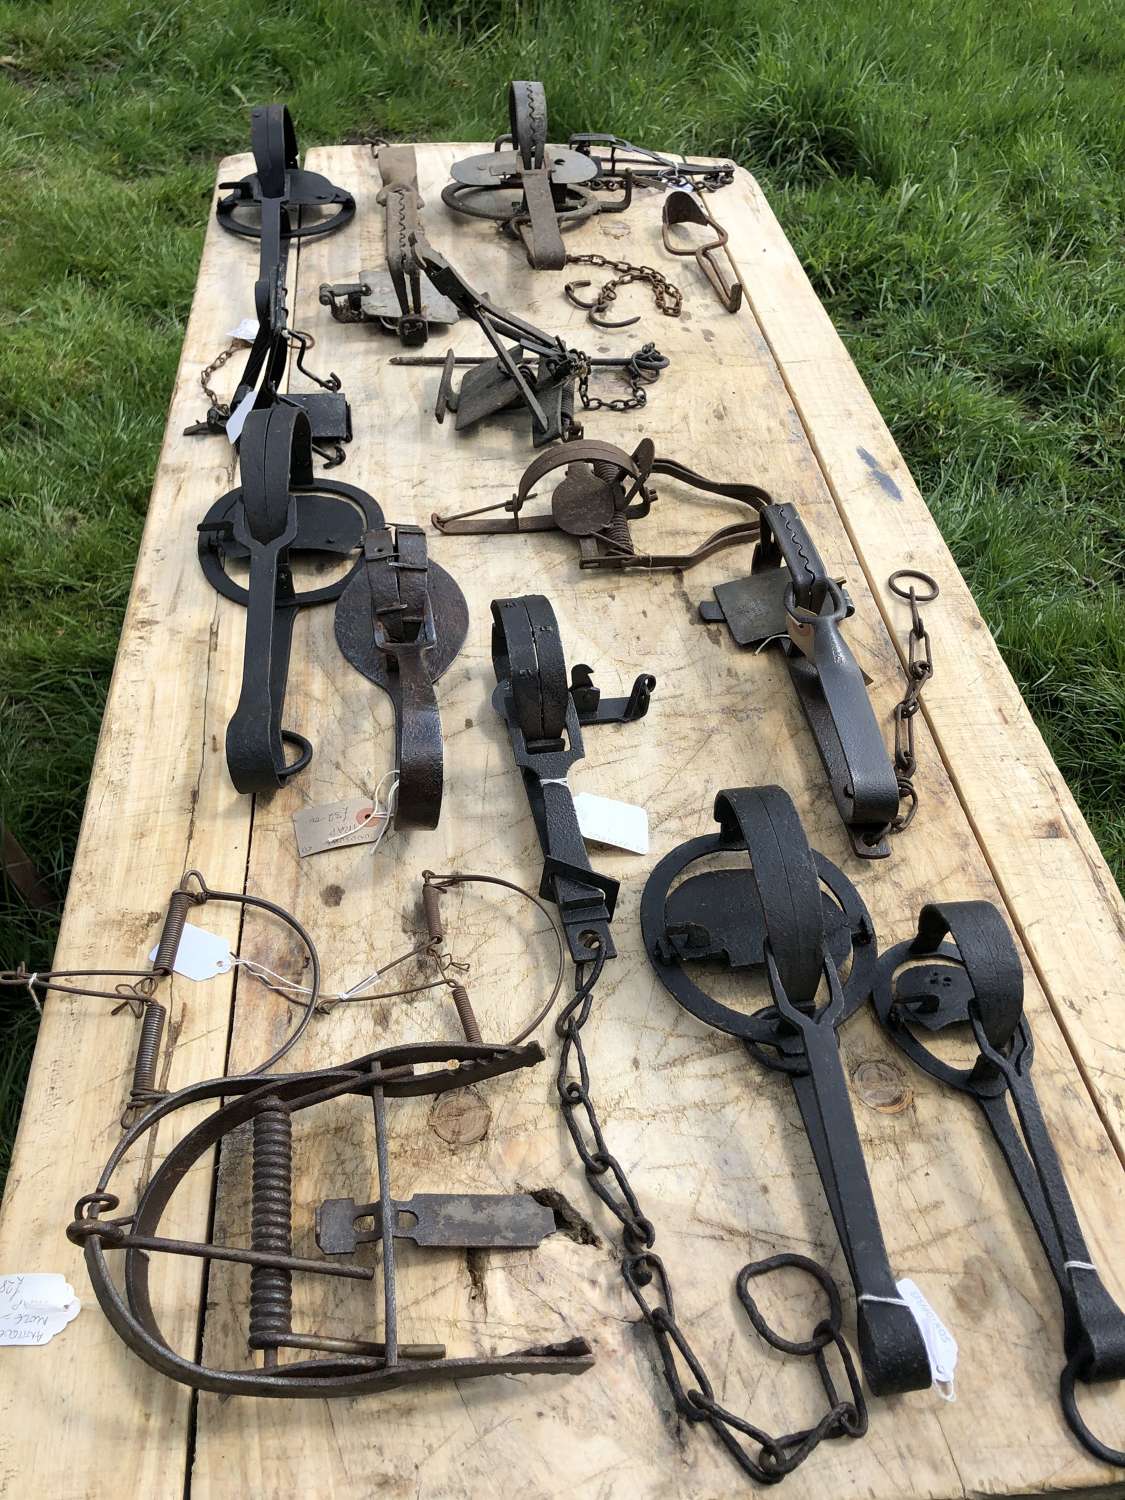 Some of the Traps we have in stock